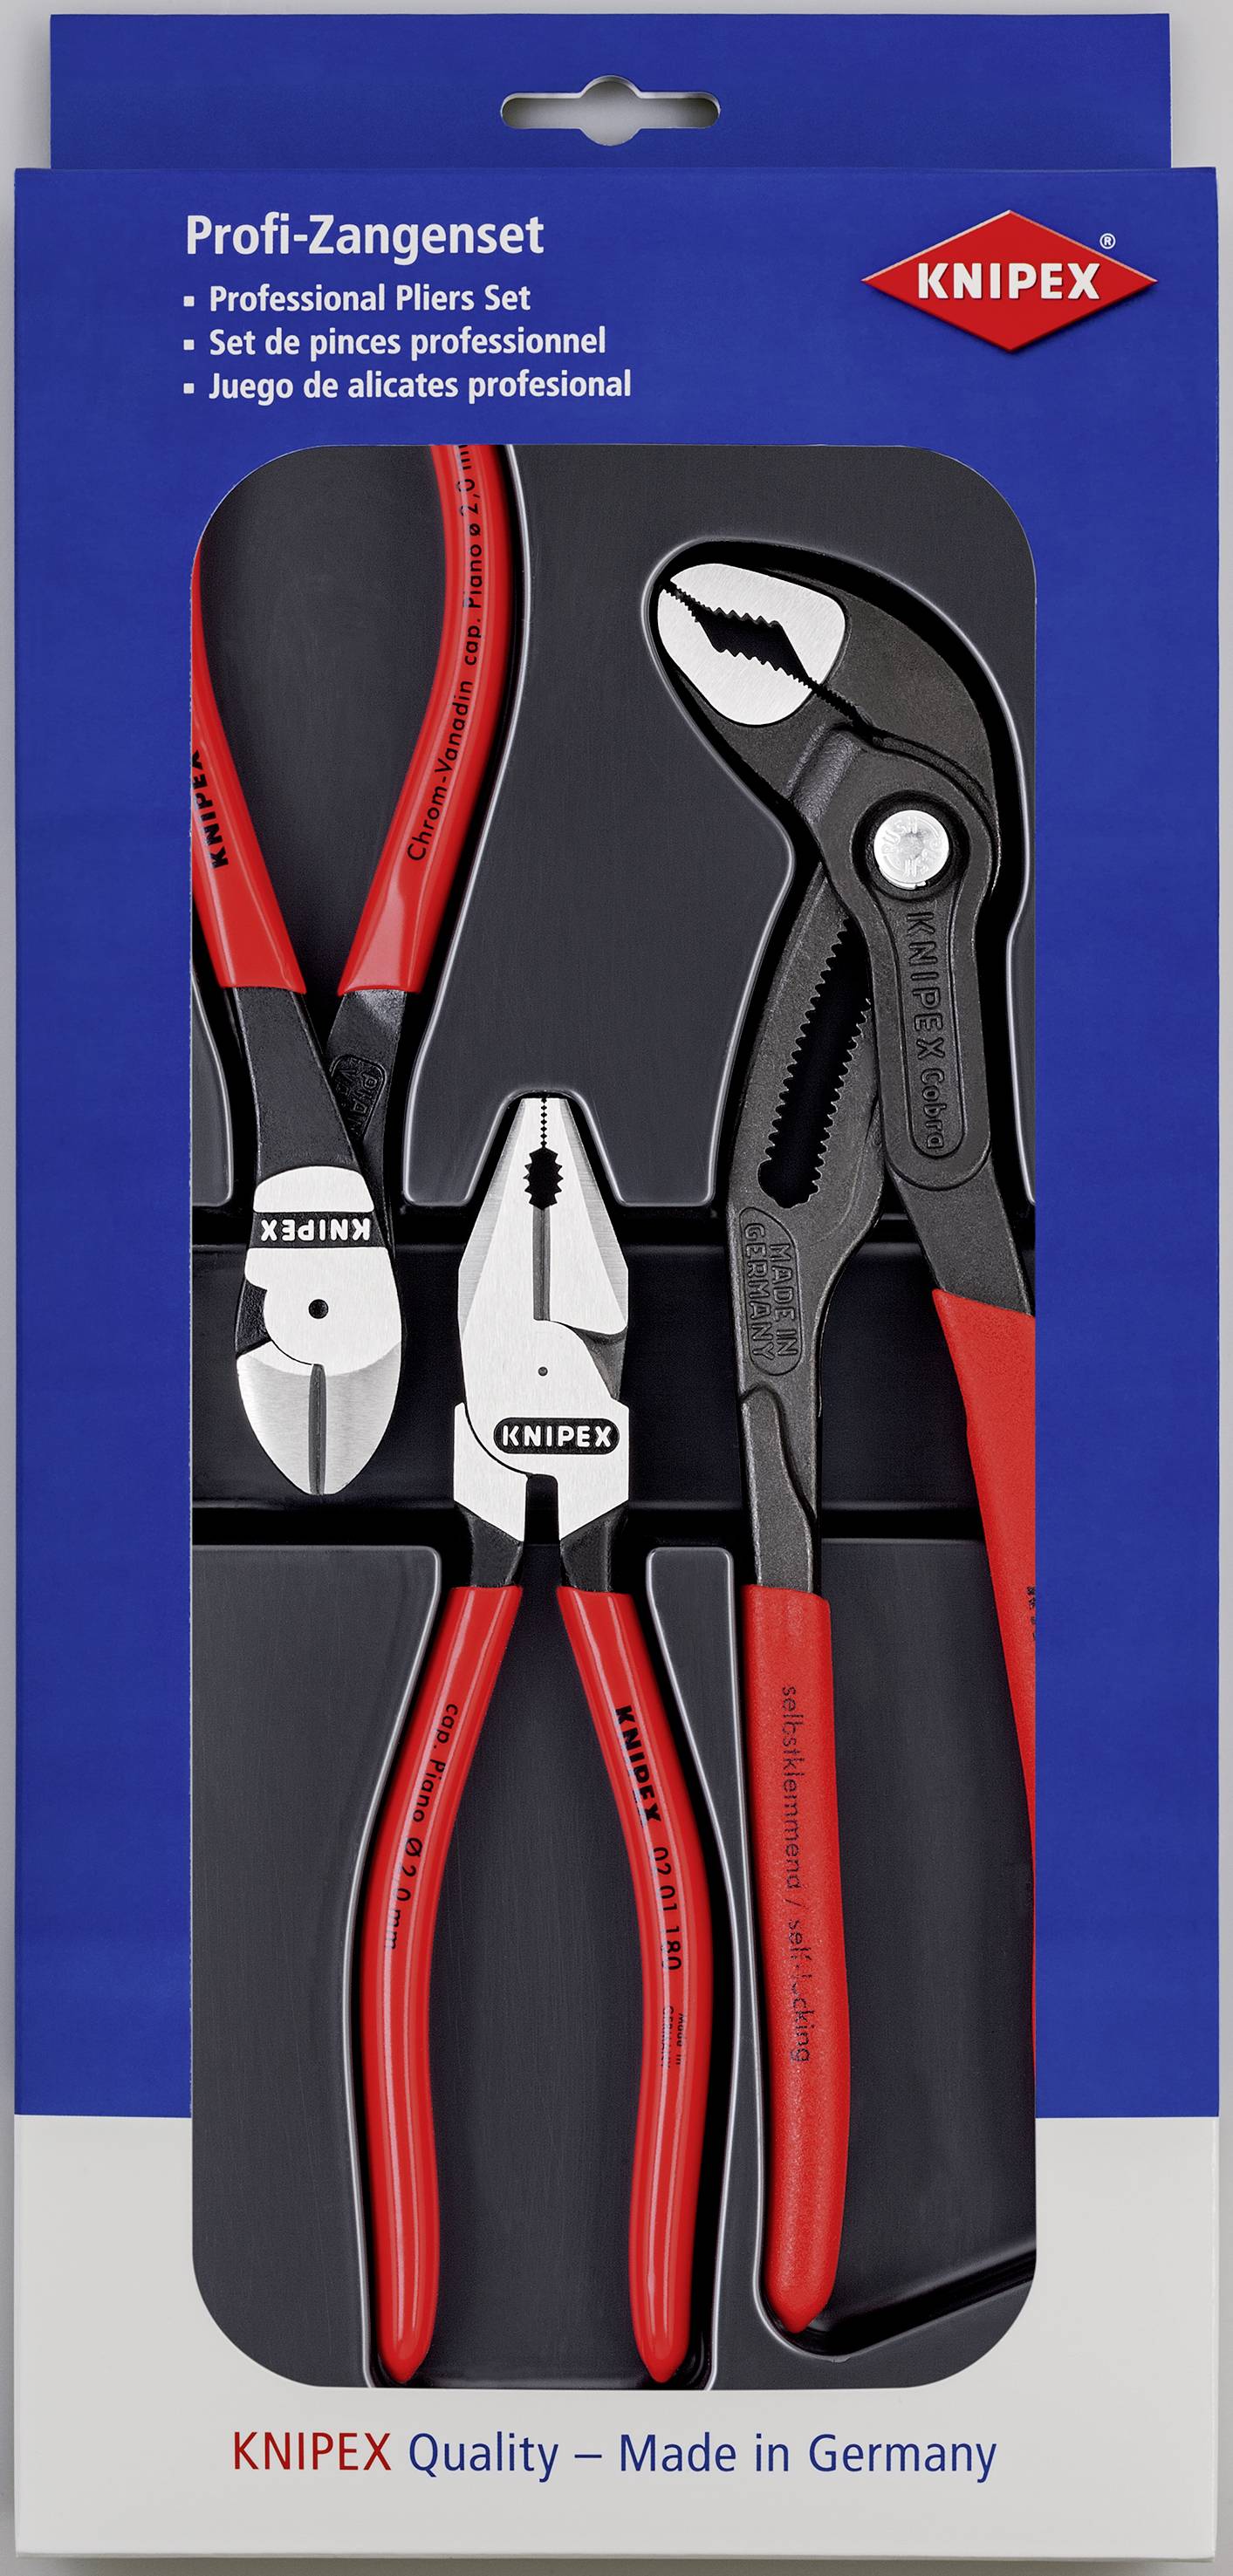 KNIPEX KNIPEX 00 20 08 US1 3 Piece Kraft 1 Pliers Set german made cutters needlenose 